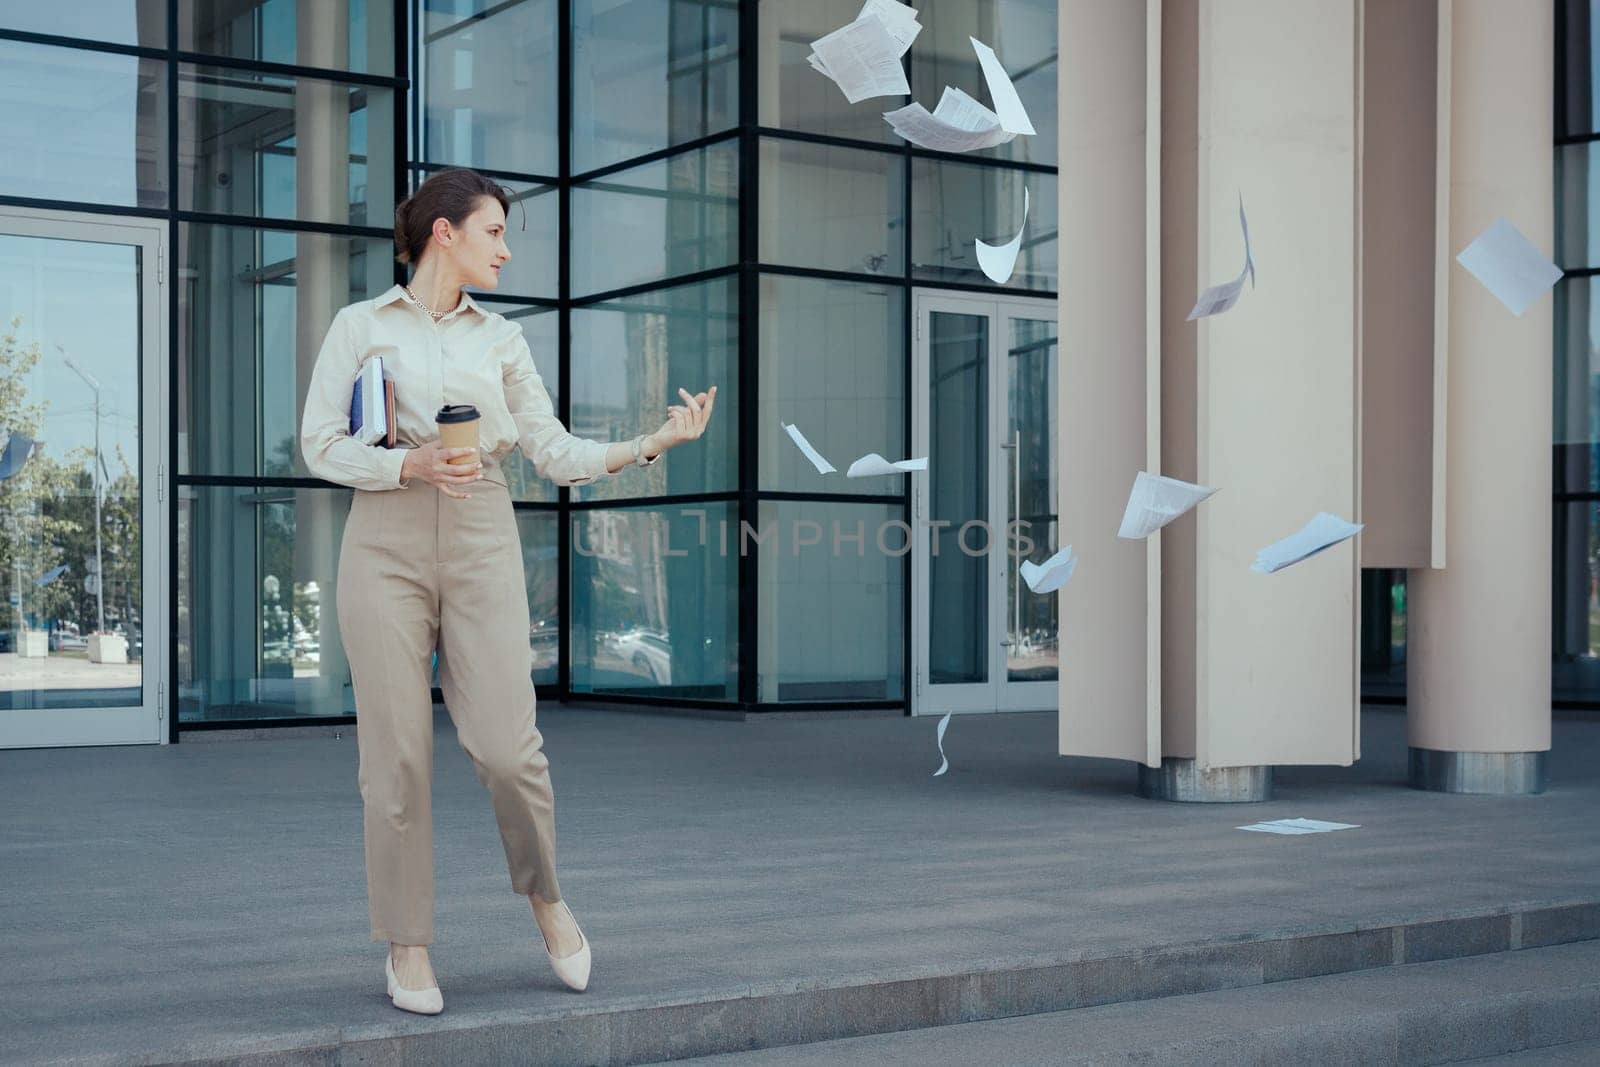 Business woman runs out of an office building throwing paperwork around. How to freeze current affairs before vacation or weekend, time management problems.